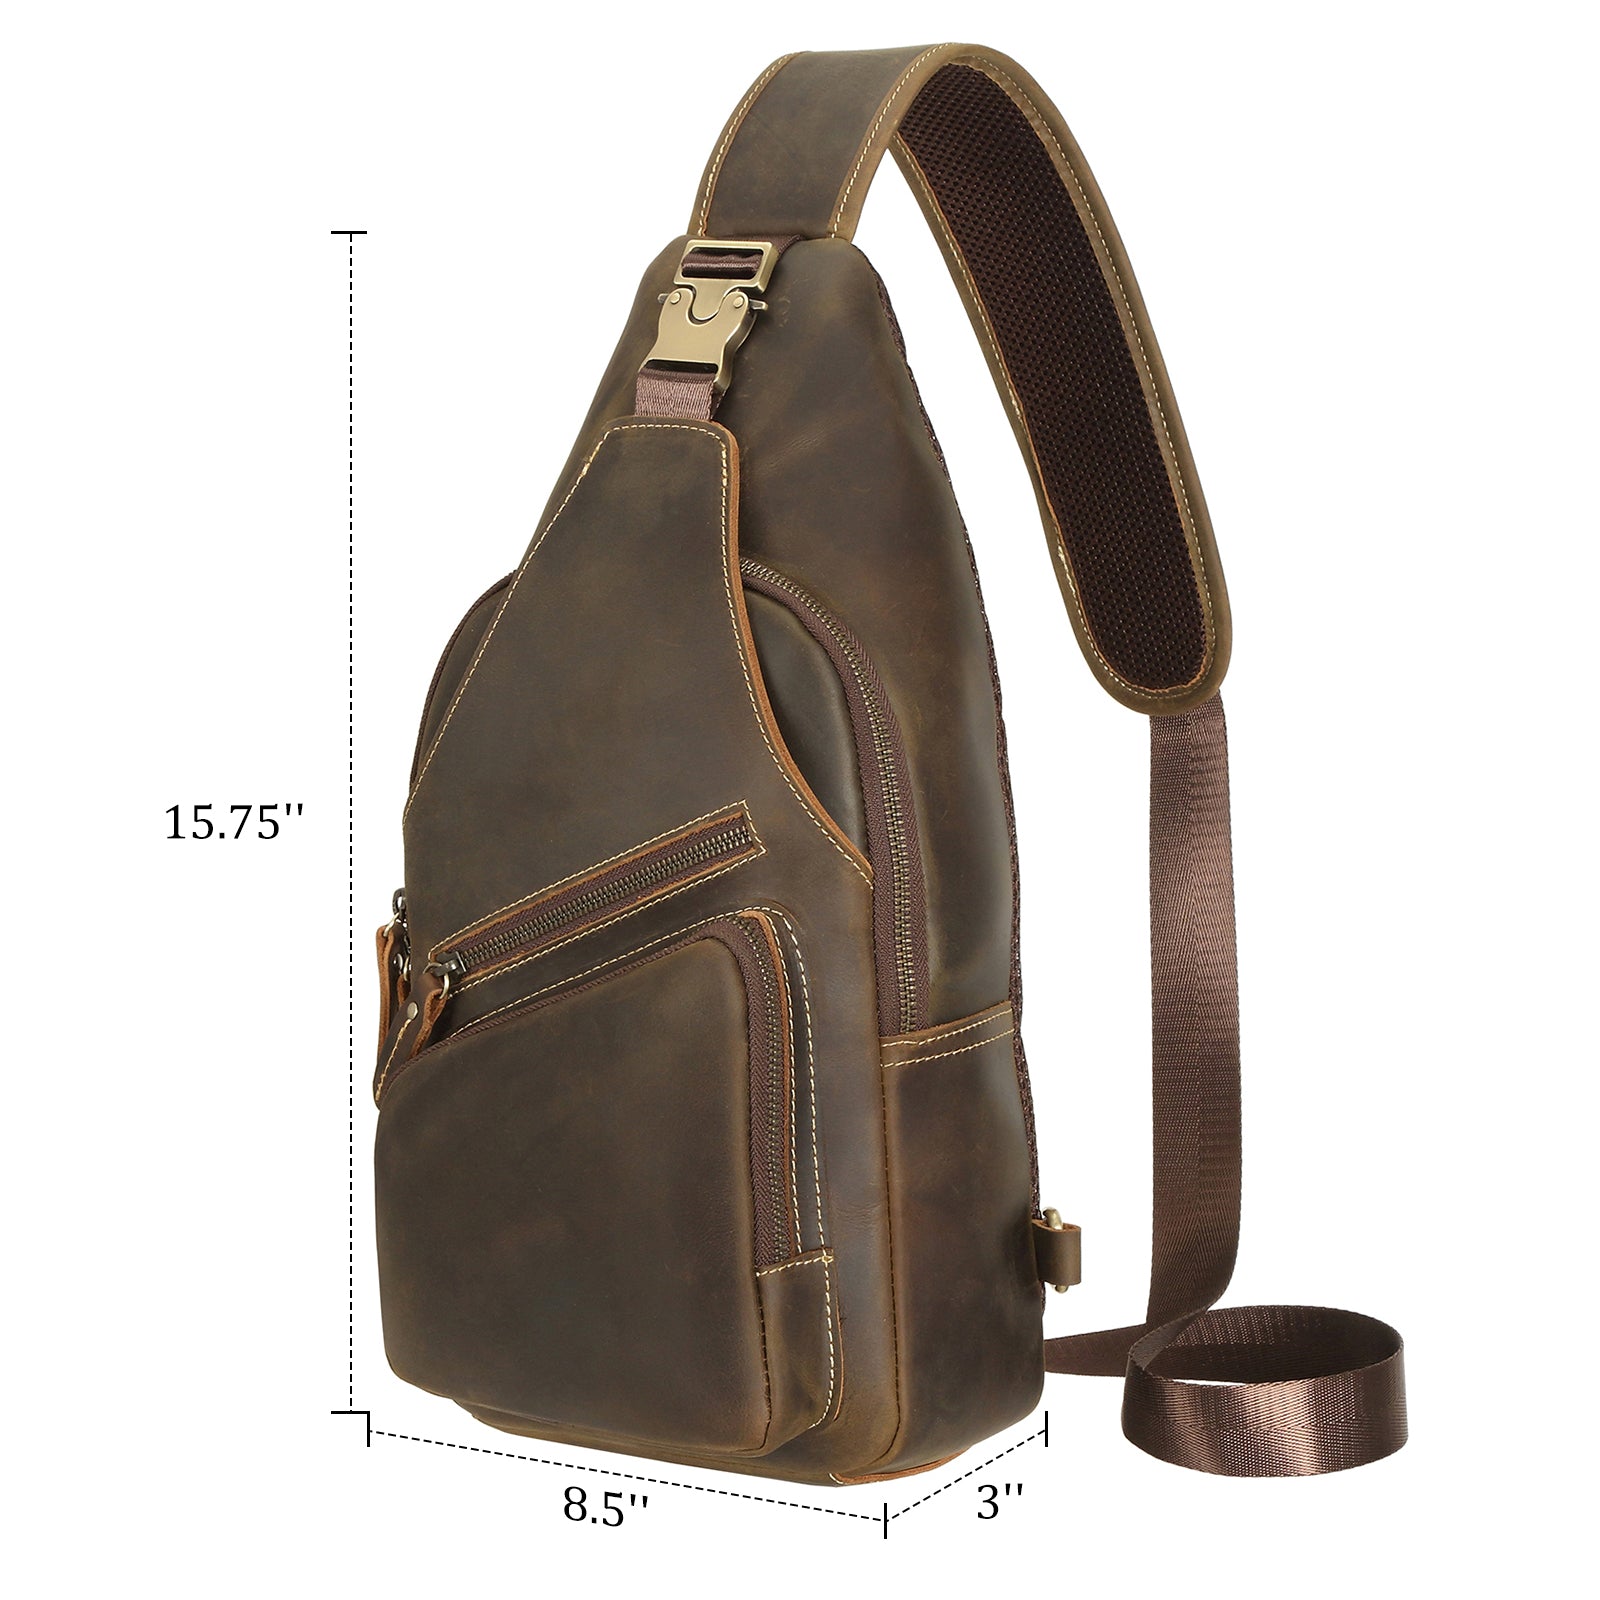 Polare Original Polare Cowhide Leather Waterproof Casual Daypack Sling Shoulder Chest Crossbody Bag for Men